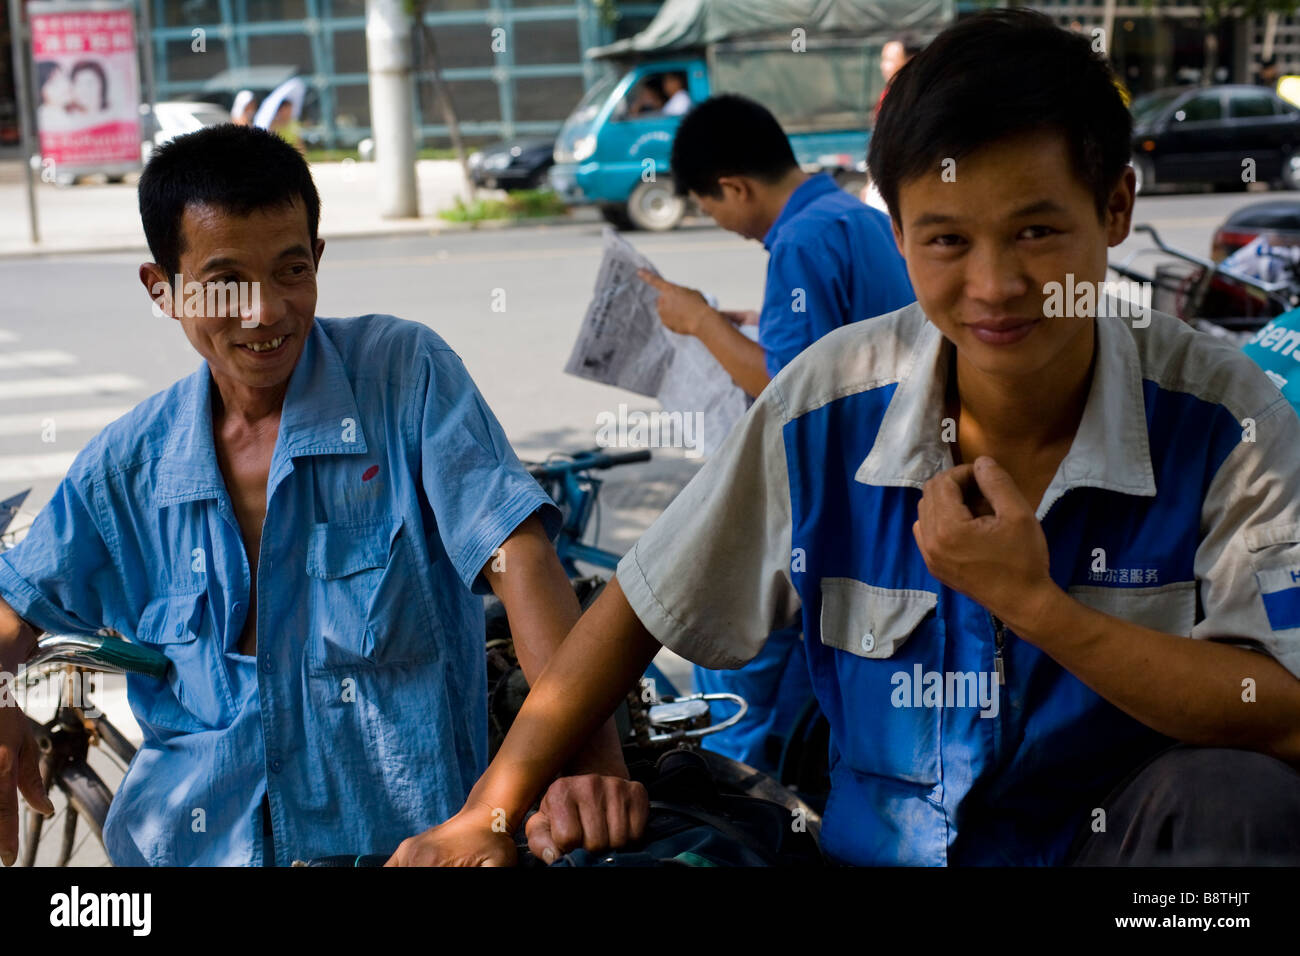 Plumbers waiting for clients on their bicycles in Wuhan city, Hubei province, China. Stock Photo